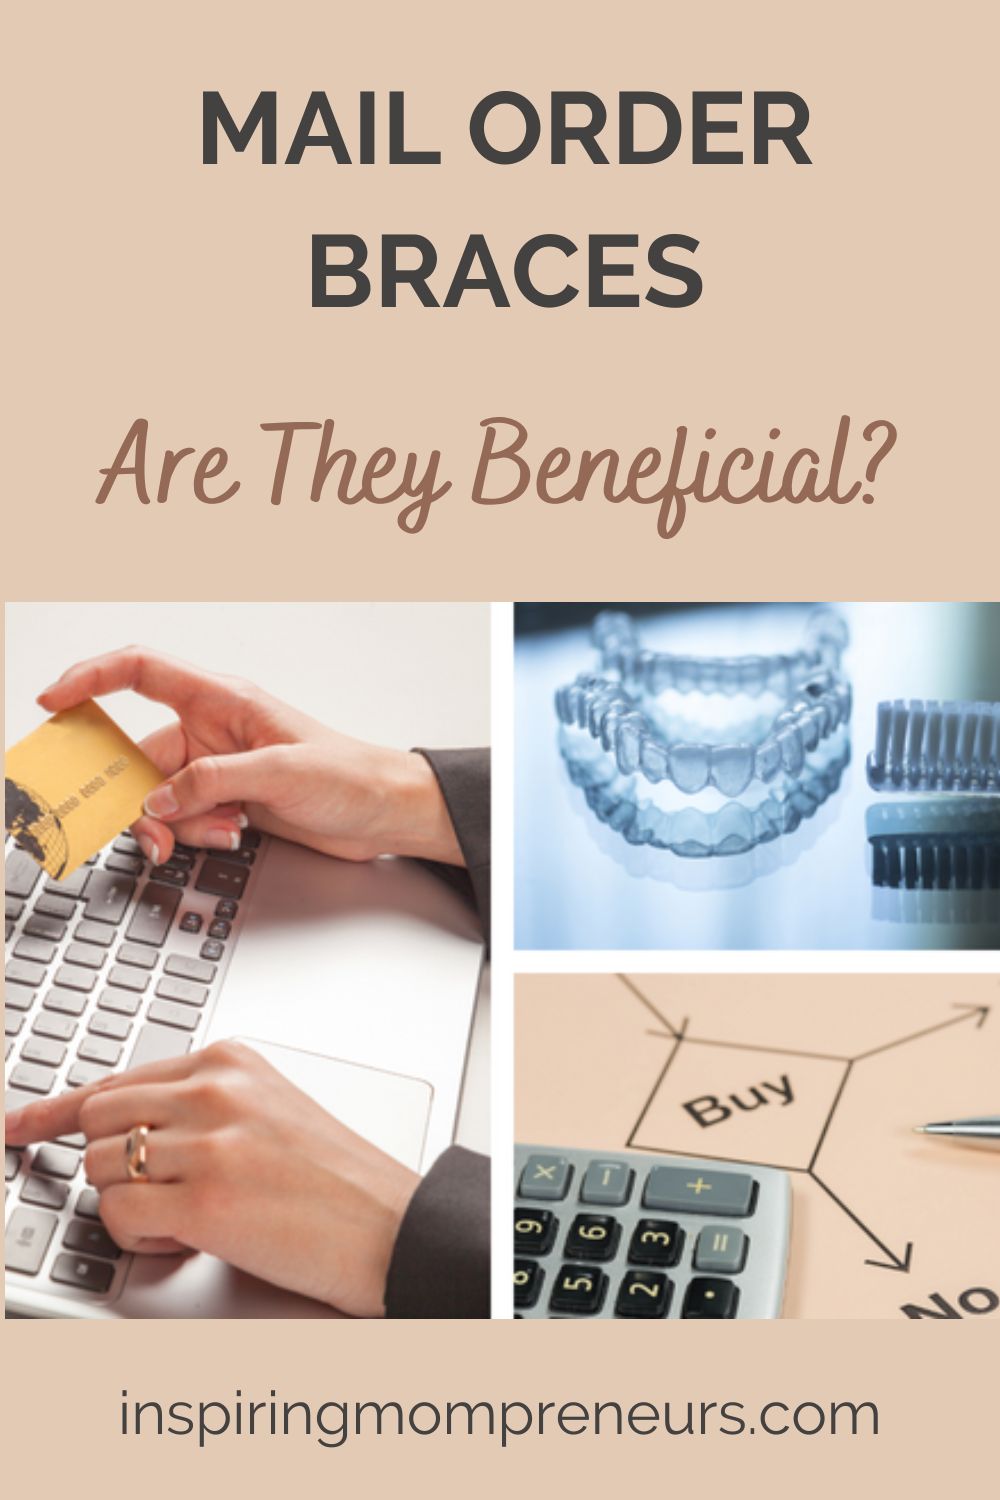 With the rise of Tik Tok and Instagram influencers there's been a nationwide take up of mail order braces, but are they beneficial? 

Would you buy braces online?

#mailorderbraces #dentalbraces #dentalaligners 